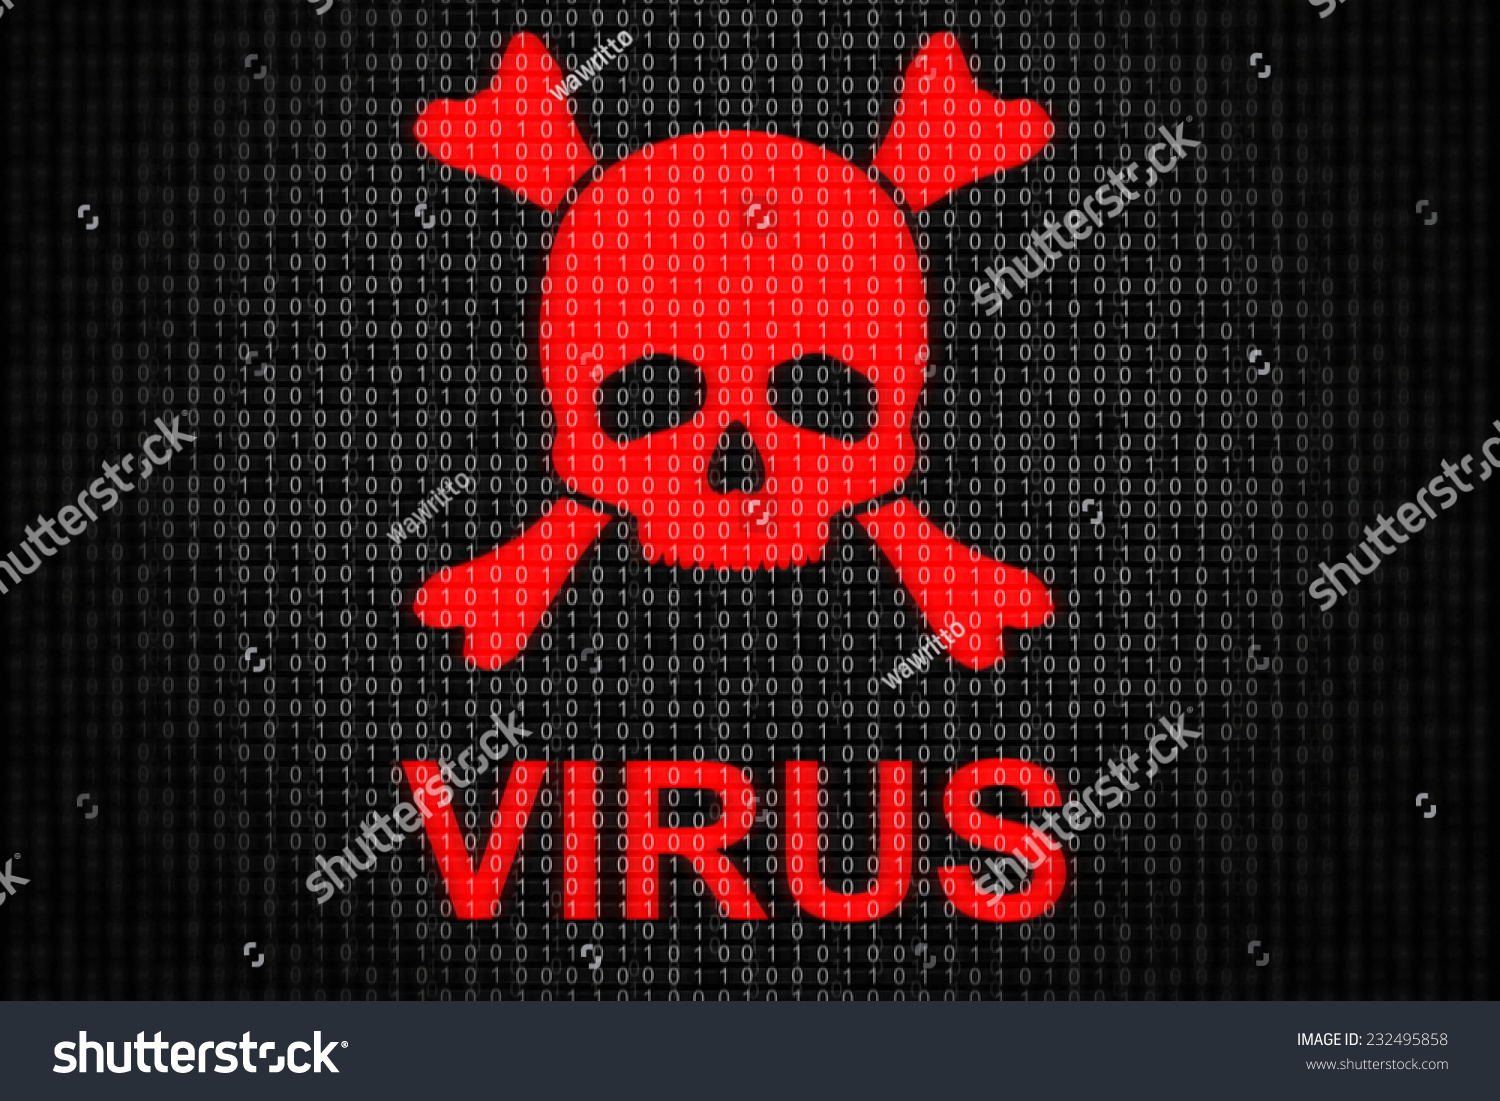 Concept Computer Virus Binary Code Red Stock Photo Edit Now